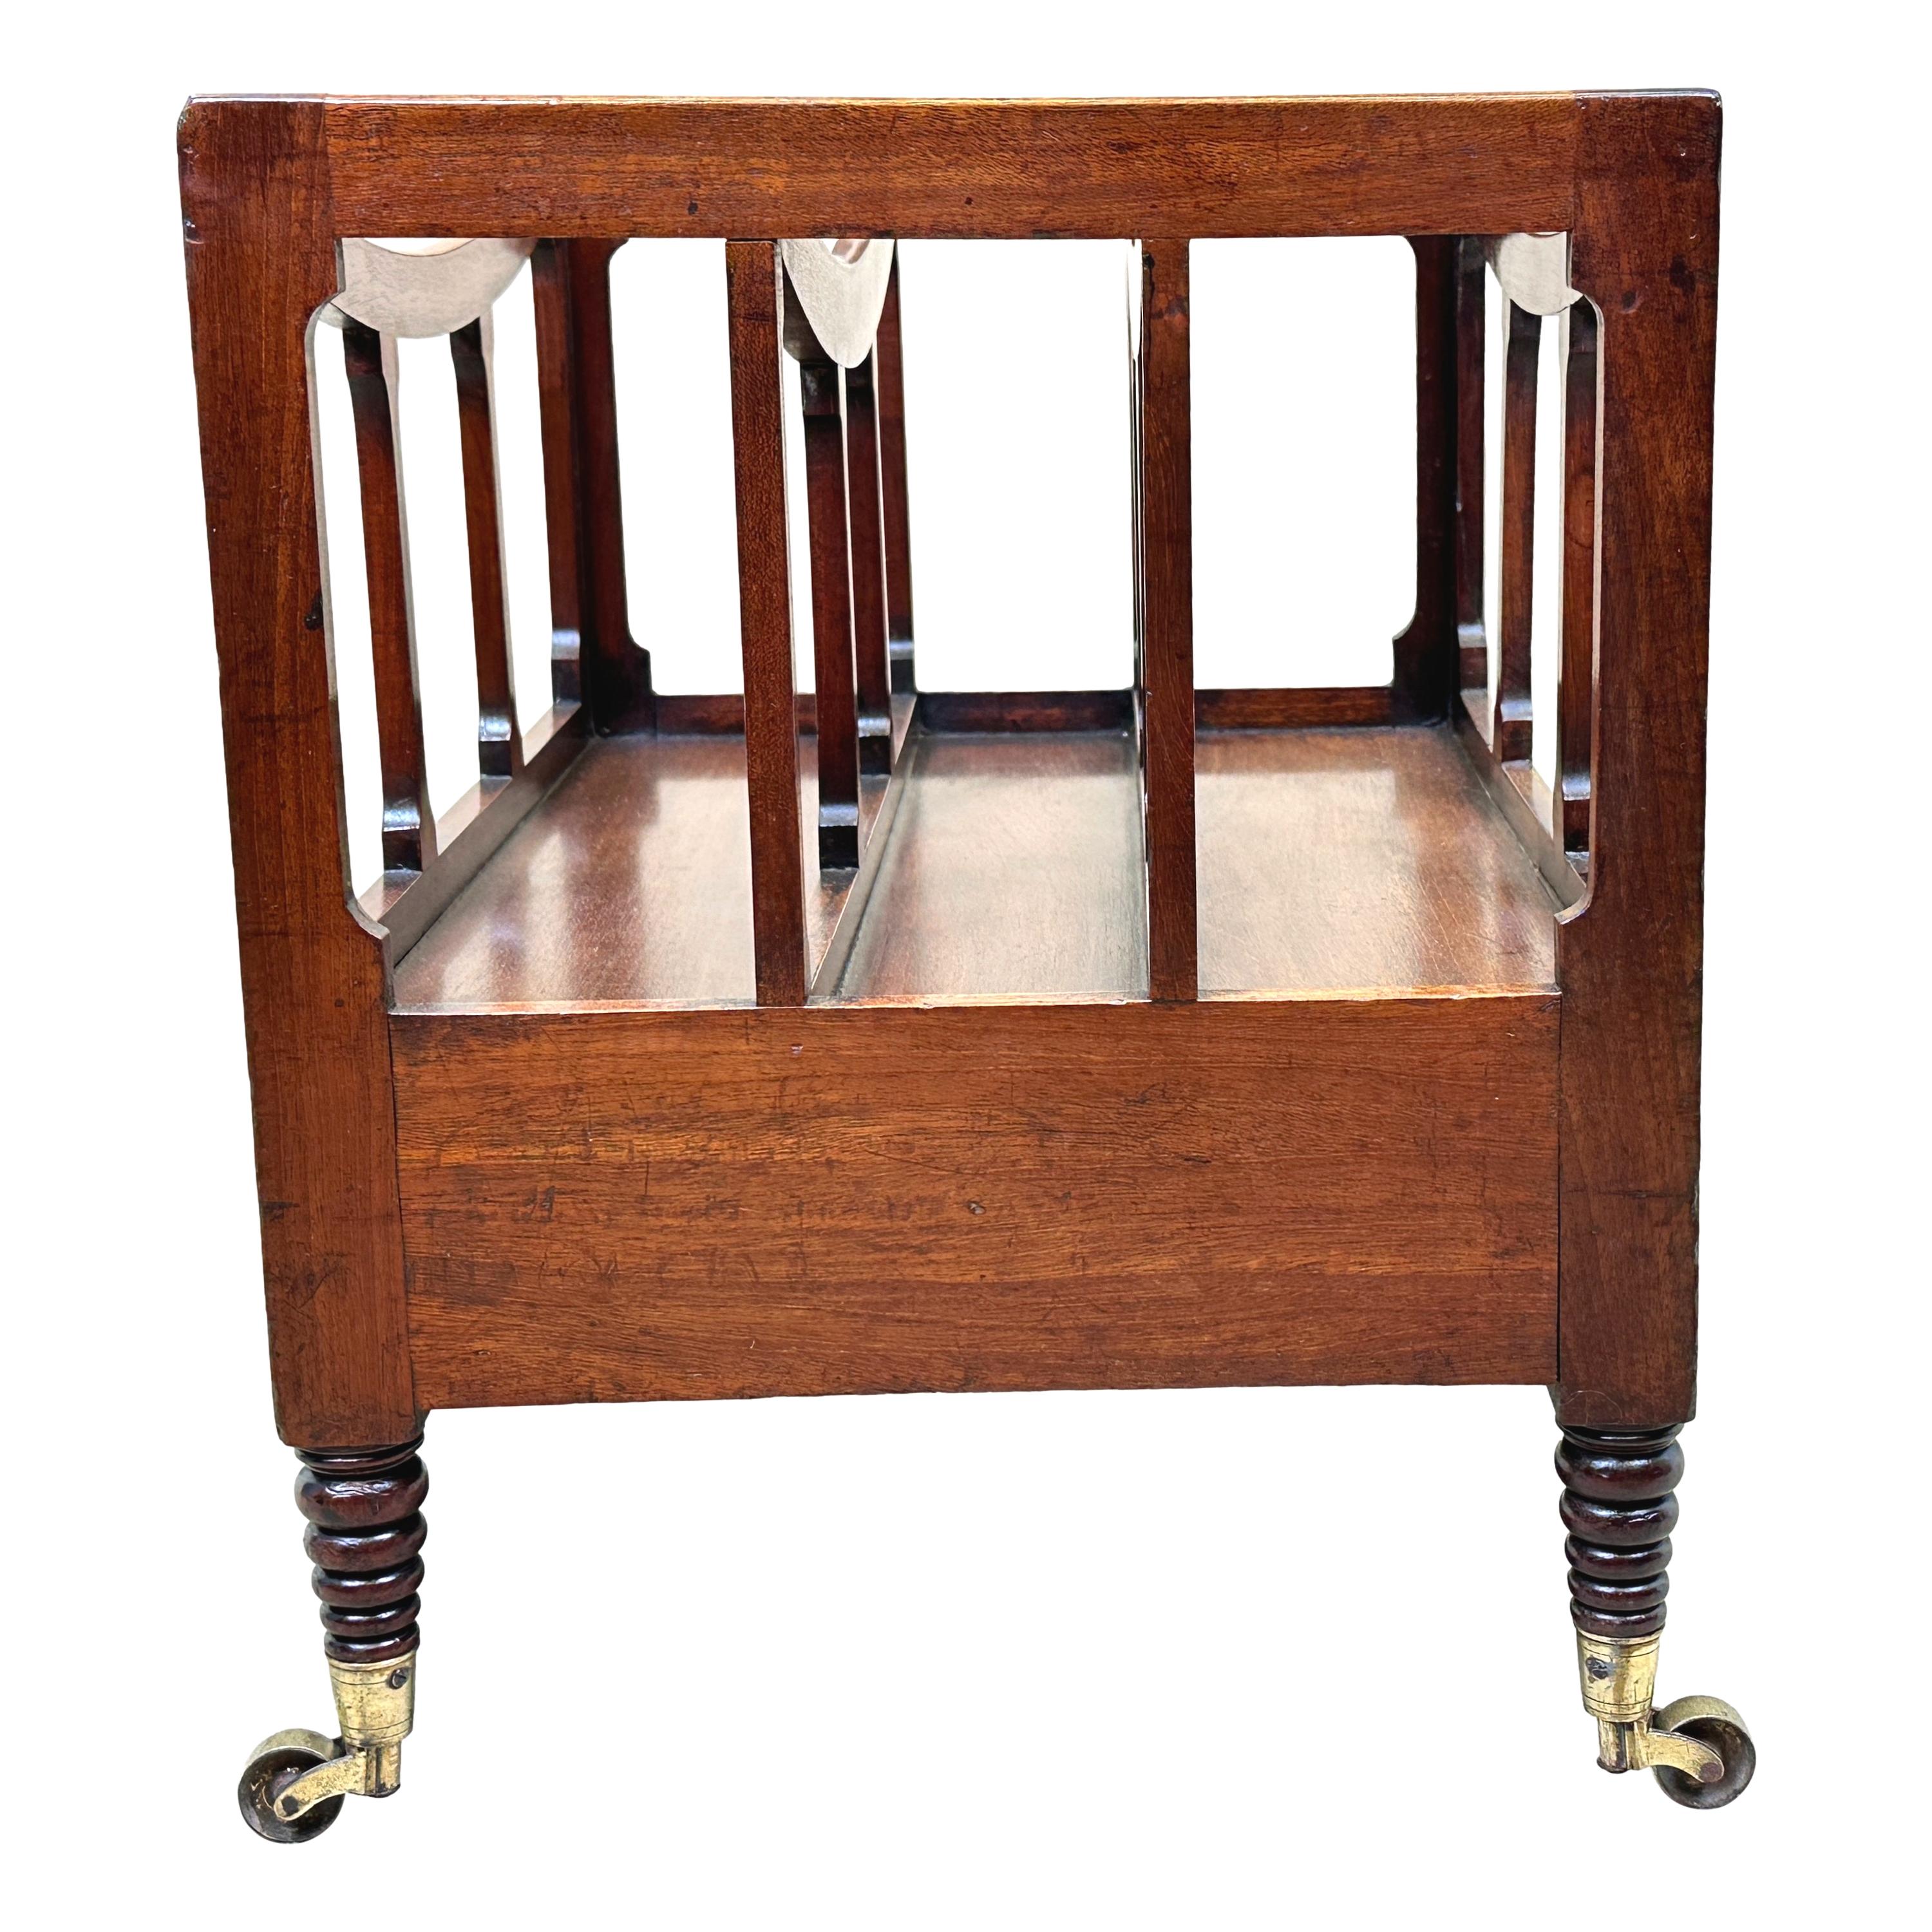 A very good quality early 19th century, regency period, mahogany boat shaped canterbury, having elegant square upright supports and divisions, over one frieze drawer, raised on unusual beehive turned legs with original brass castors.


The term